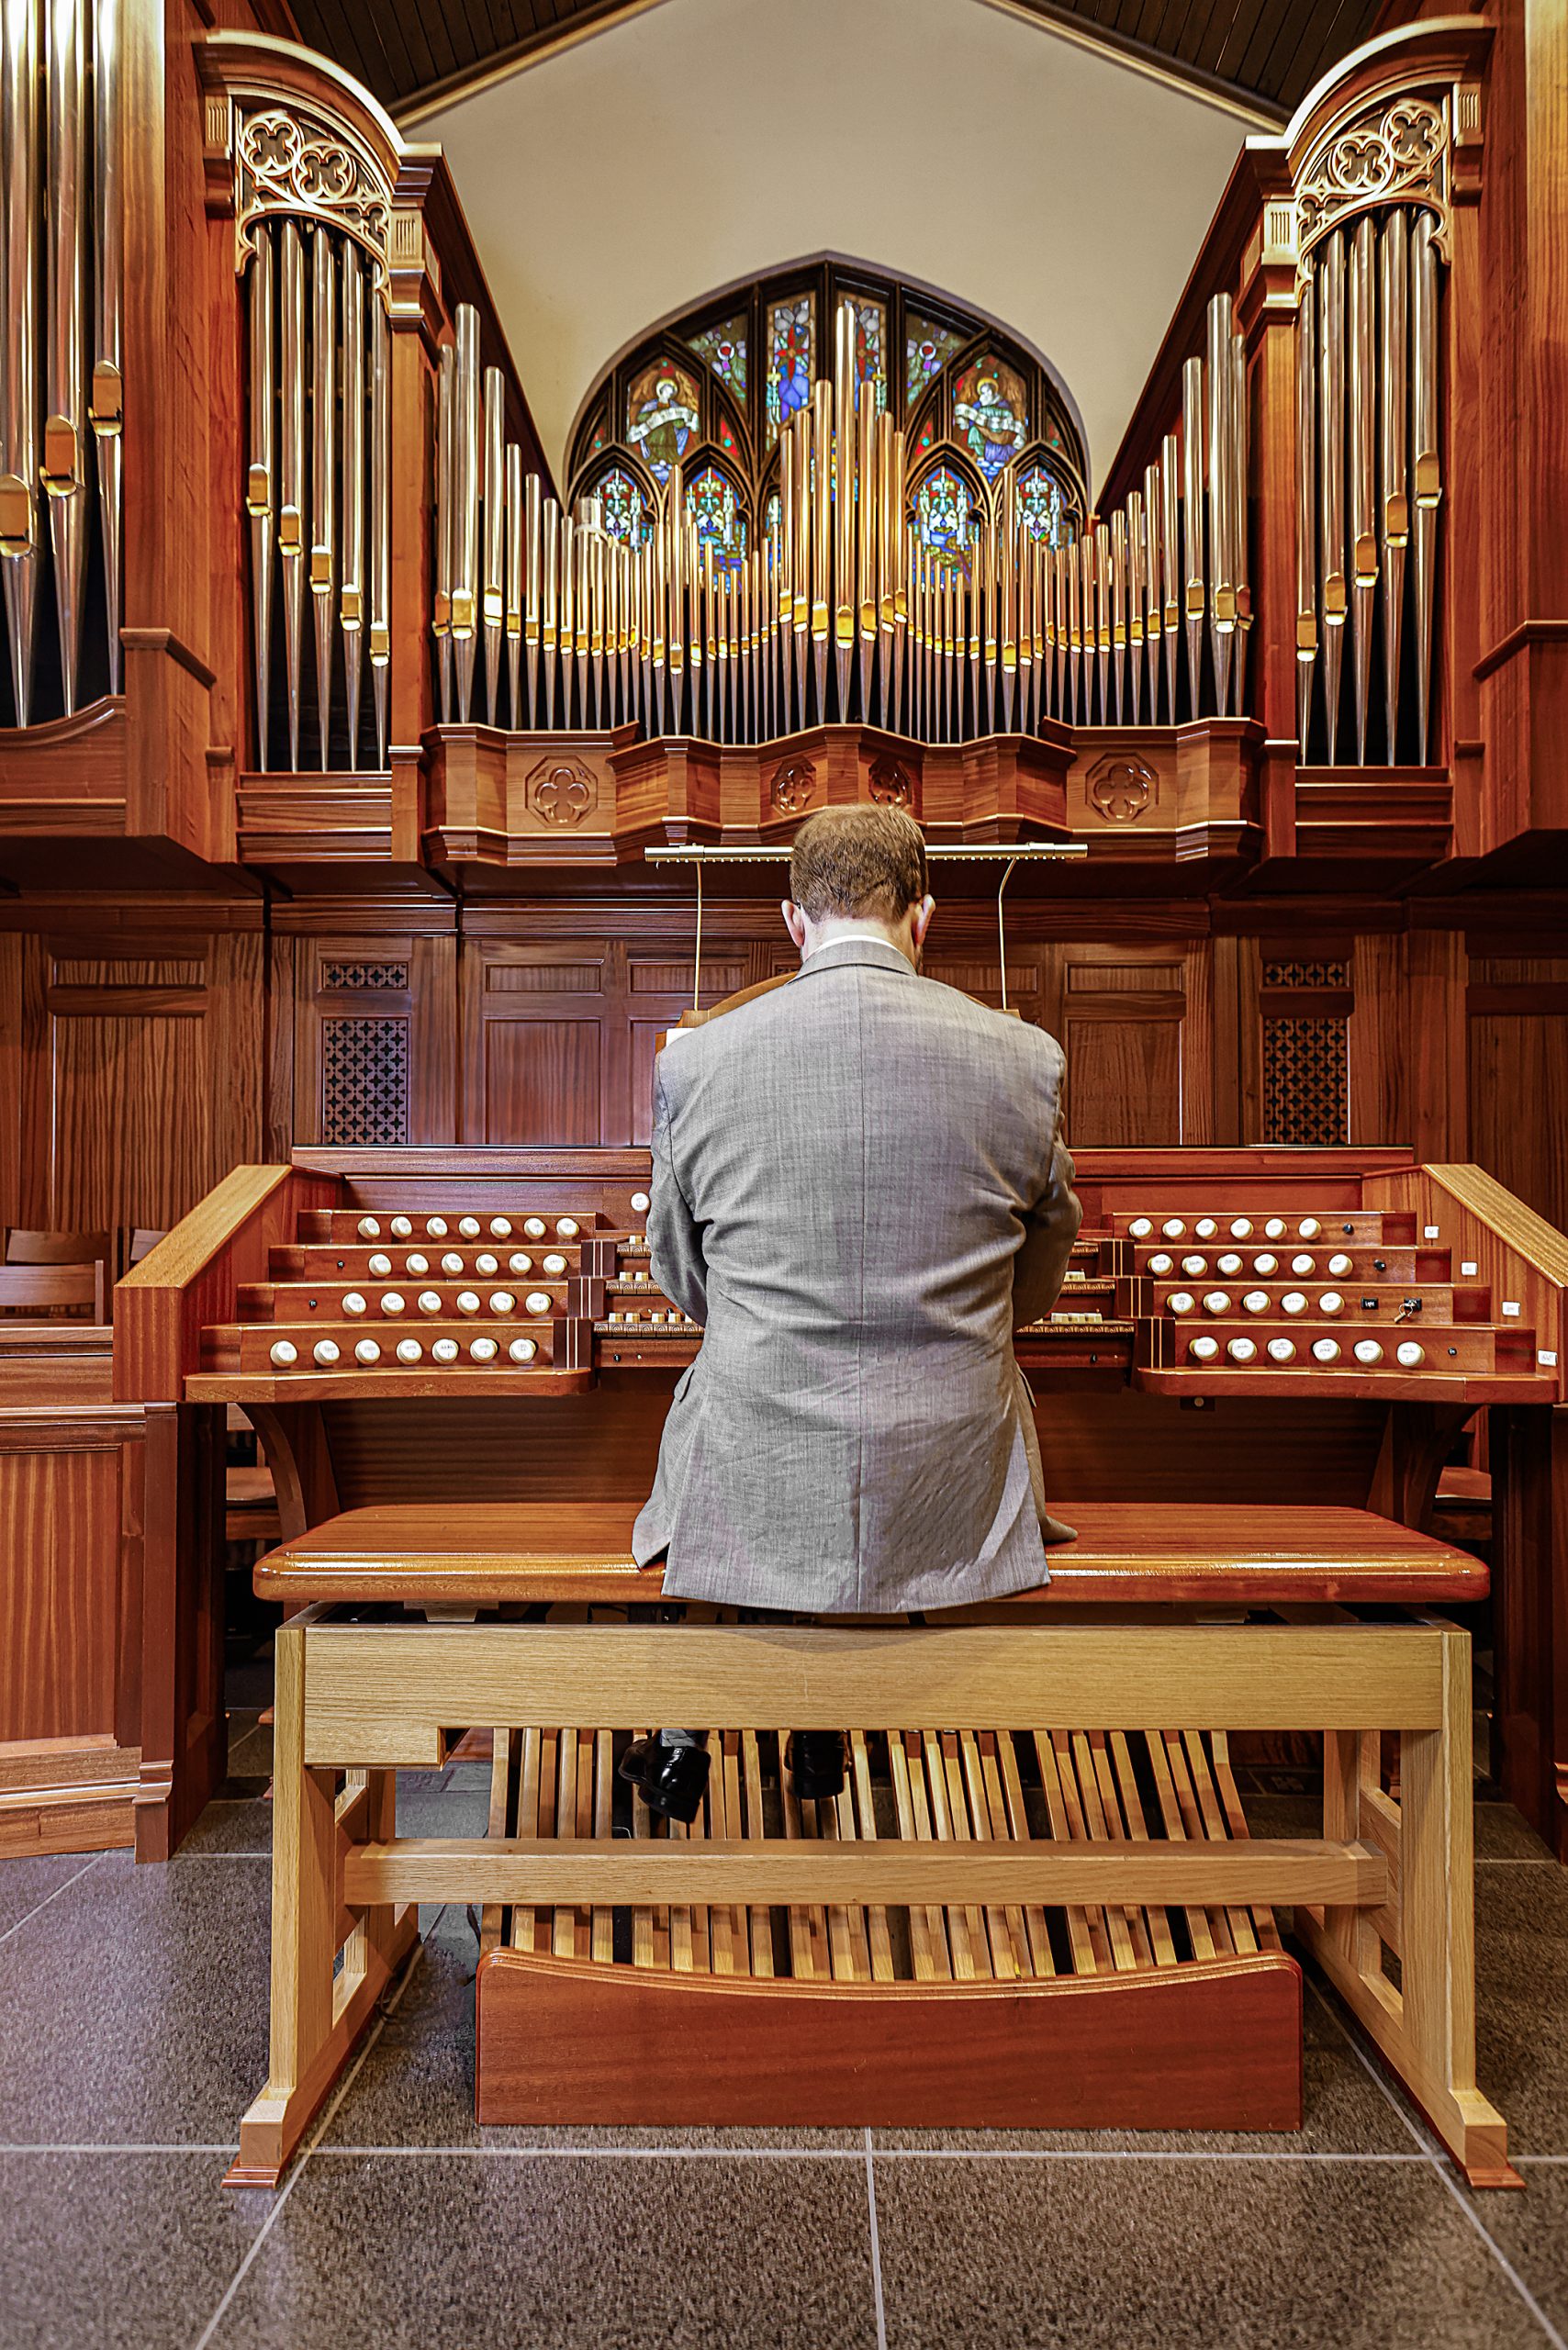 Matthew McCall has served Shandon Presbyterian Church since November 2019 as director of music and media. Matthew earned a Bachelor of Arts in sacred music and organ performance from Presbyterian College and a Master of Music in choral conducting from the University of South Carolina. The organ at Shandon Presbyterian Church, built by Lewtak Pipe Organ Builders, was installed in 2016. The organ has 47 stops and 59 ranks divided between four divisions, featuring a total of 3,075 pipes. 